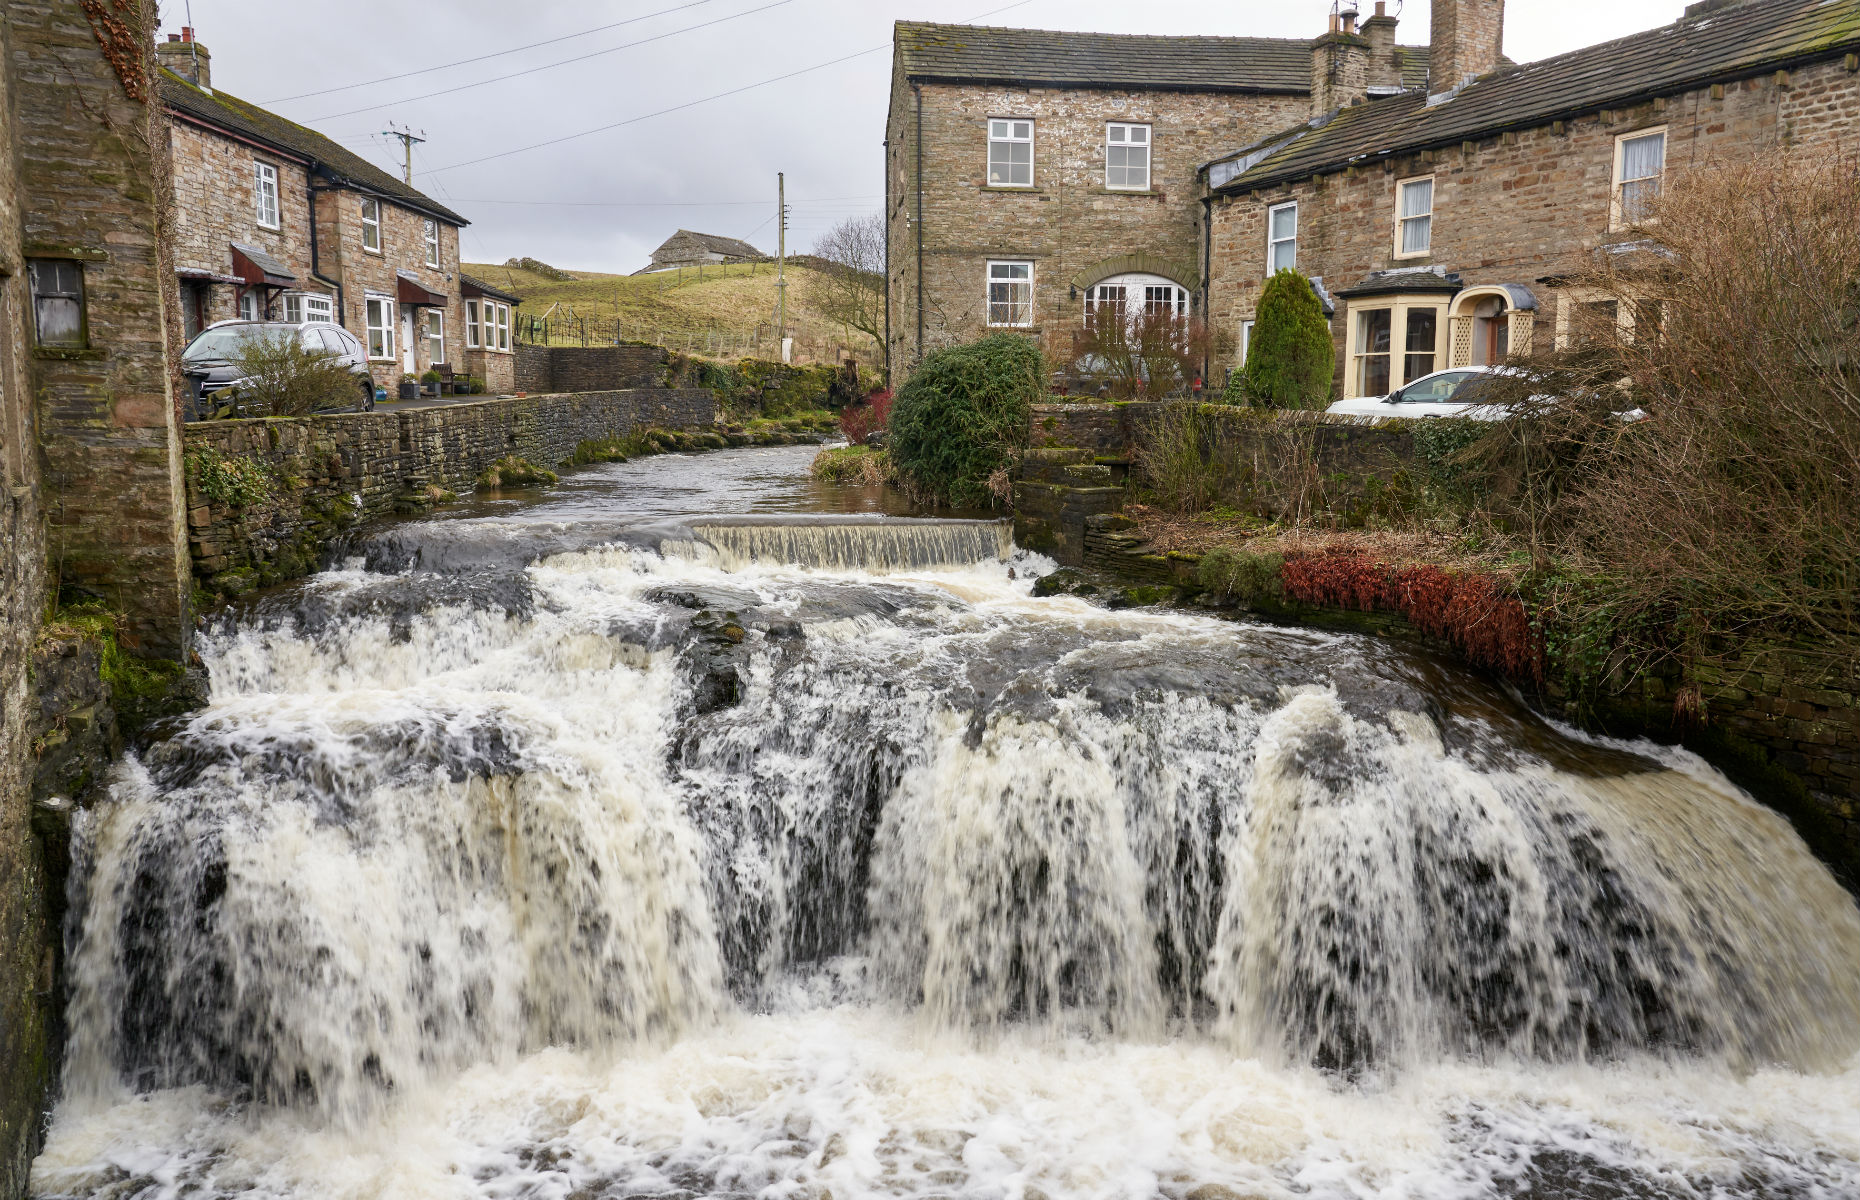 Hawes (Image: Duncan Andison/Shutterstock)